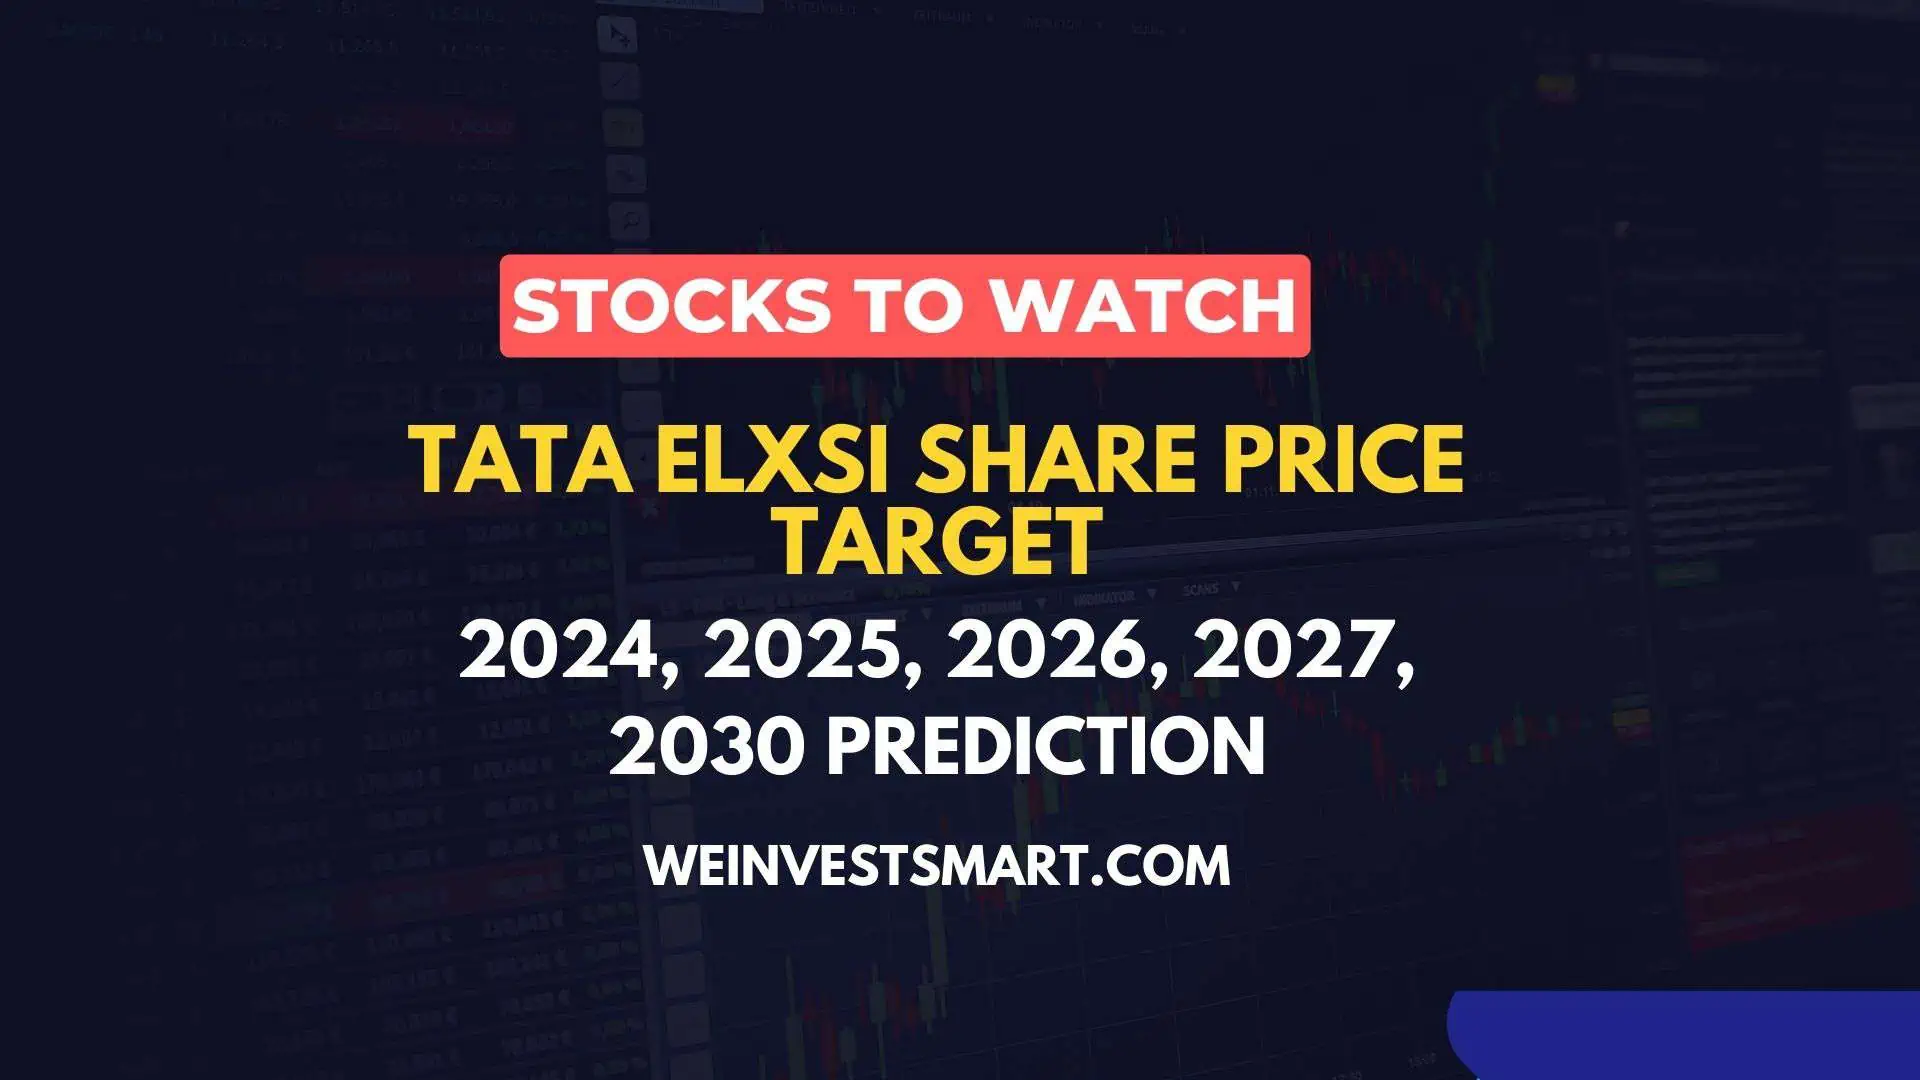 Tata Elxsi Share Price Target 2024, 2025, 2026, 2027, 2030 Prediction Buy or Sell